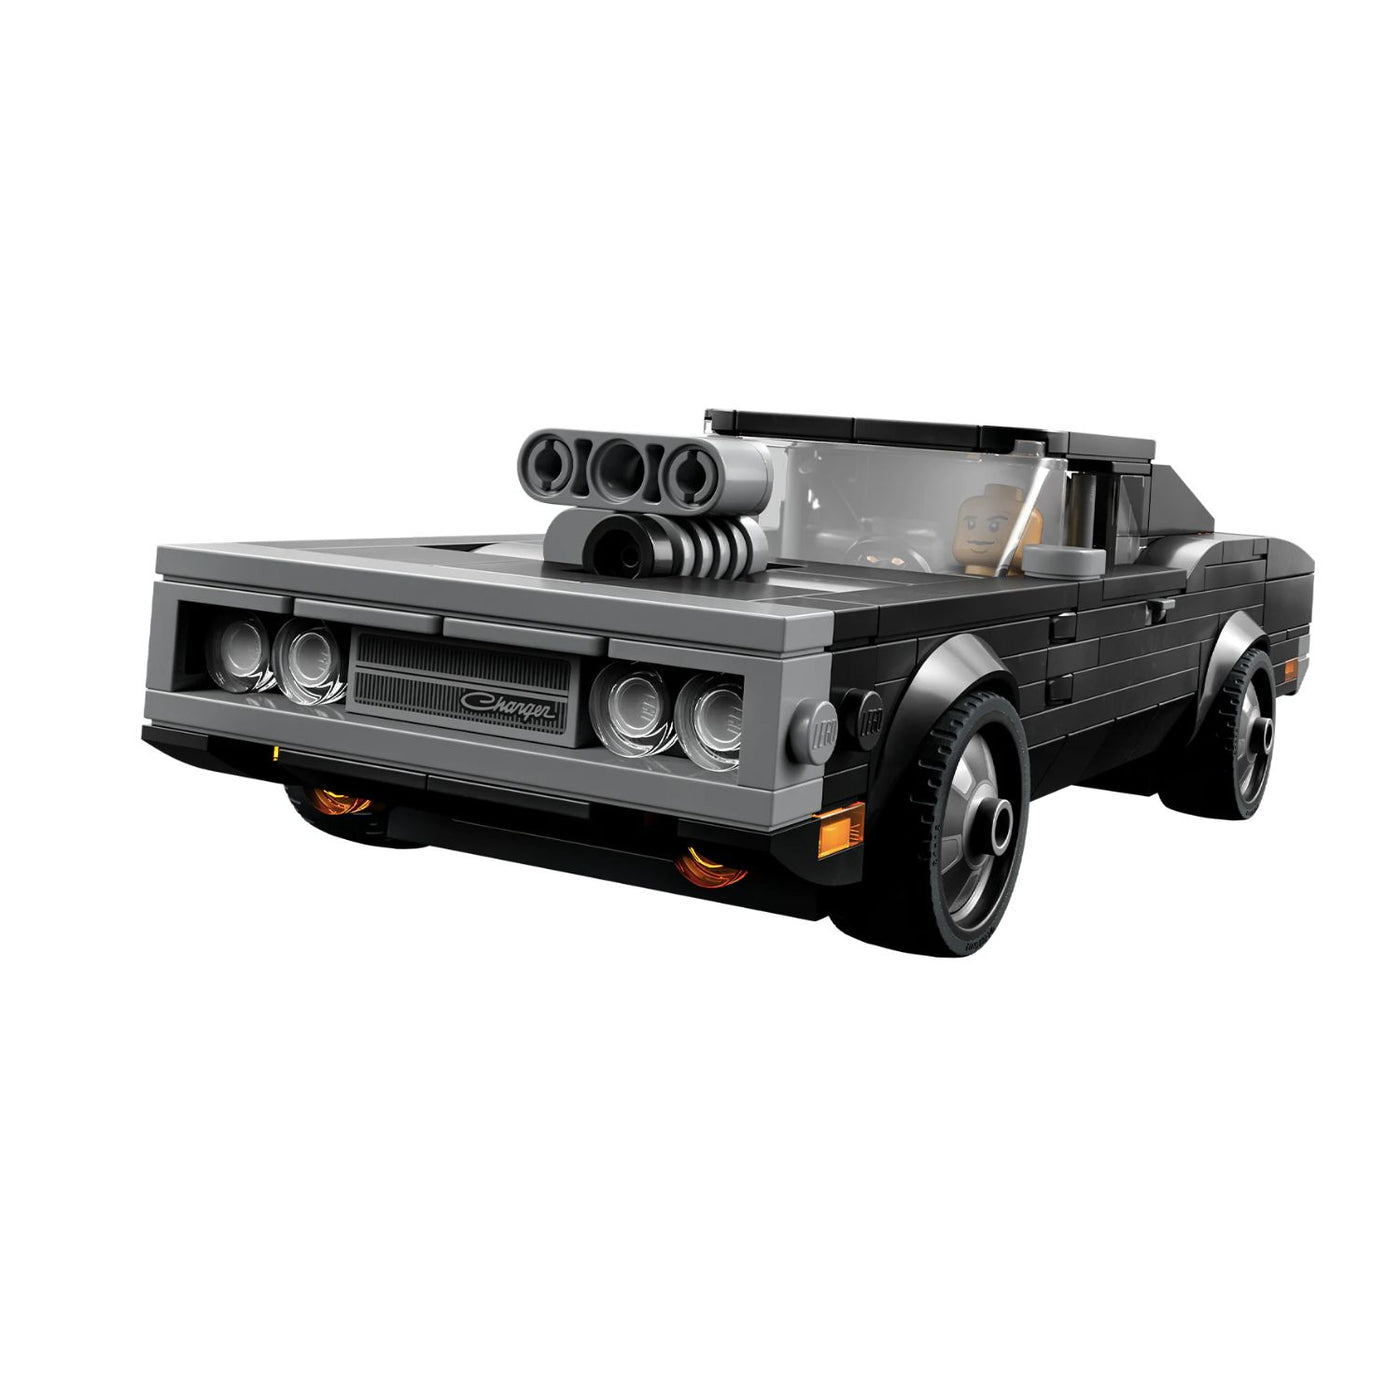  LEGO Speed Champions Fast & Furious 1970 Dodge Charger R/T  76912, Toy Muscle Car Model Kit for Kids, Collectible Set with Dominic  Toretto Minifigure : Toys & Games